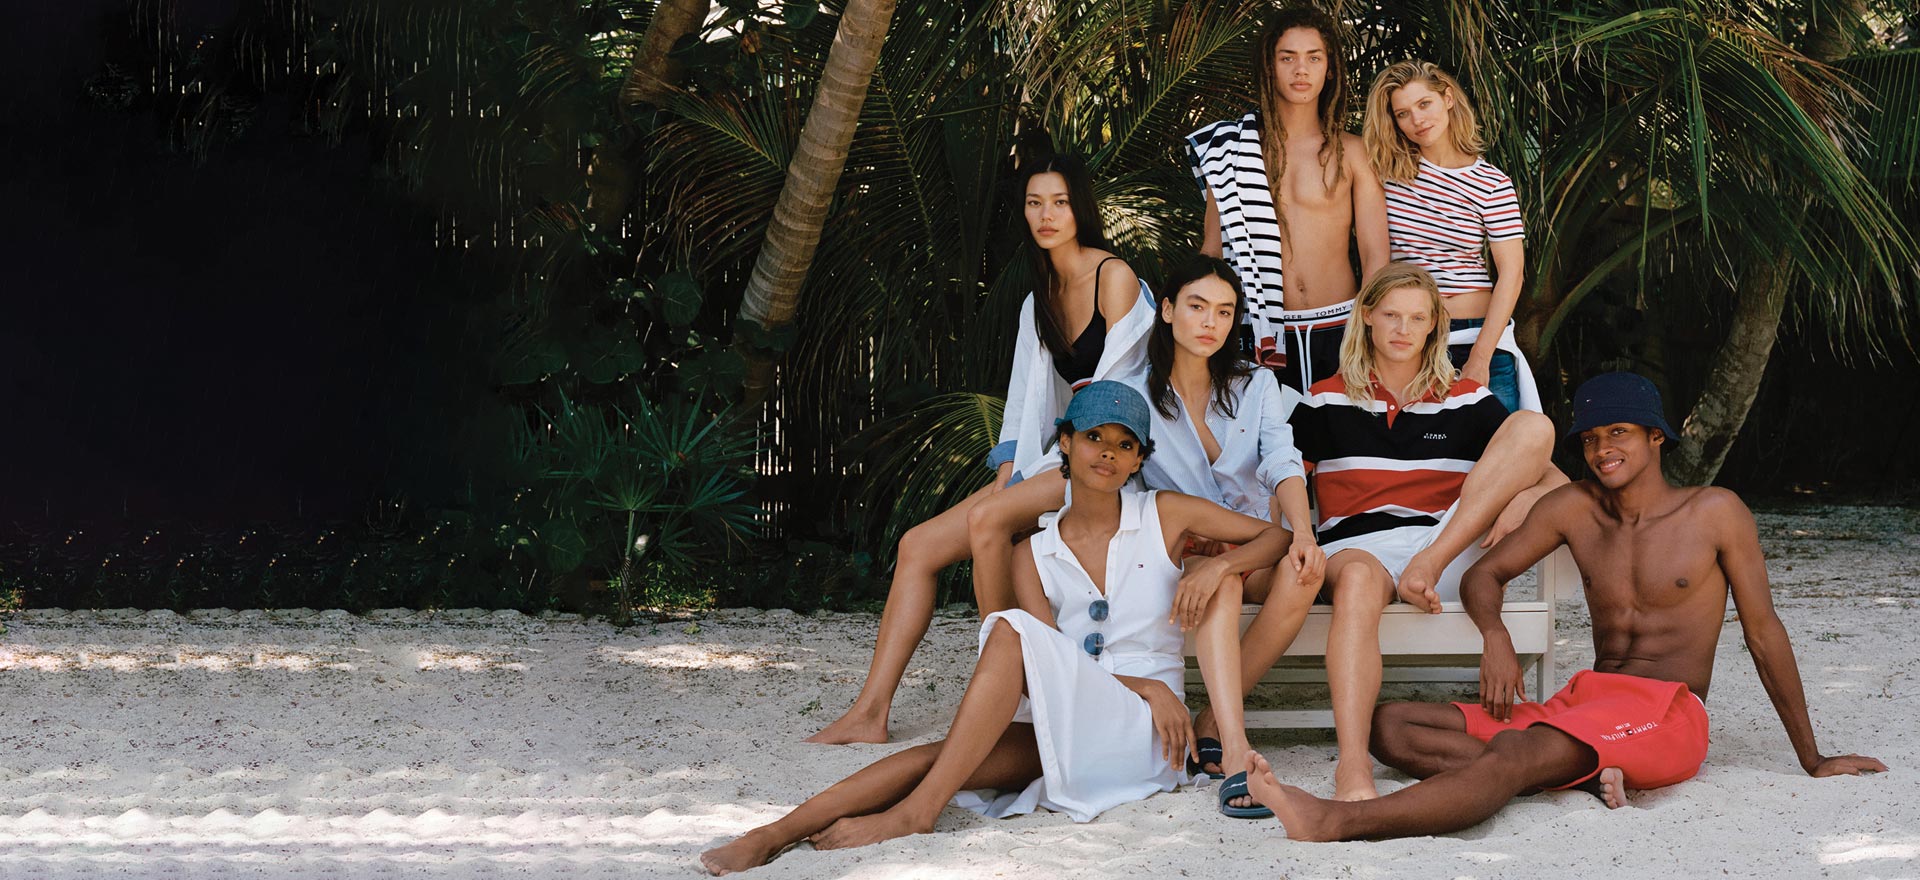 Hilfiger USA | Official Online Site and Store